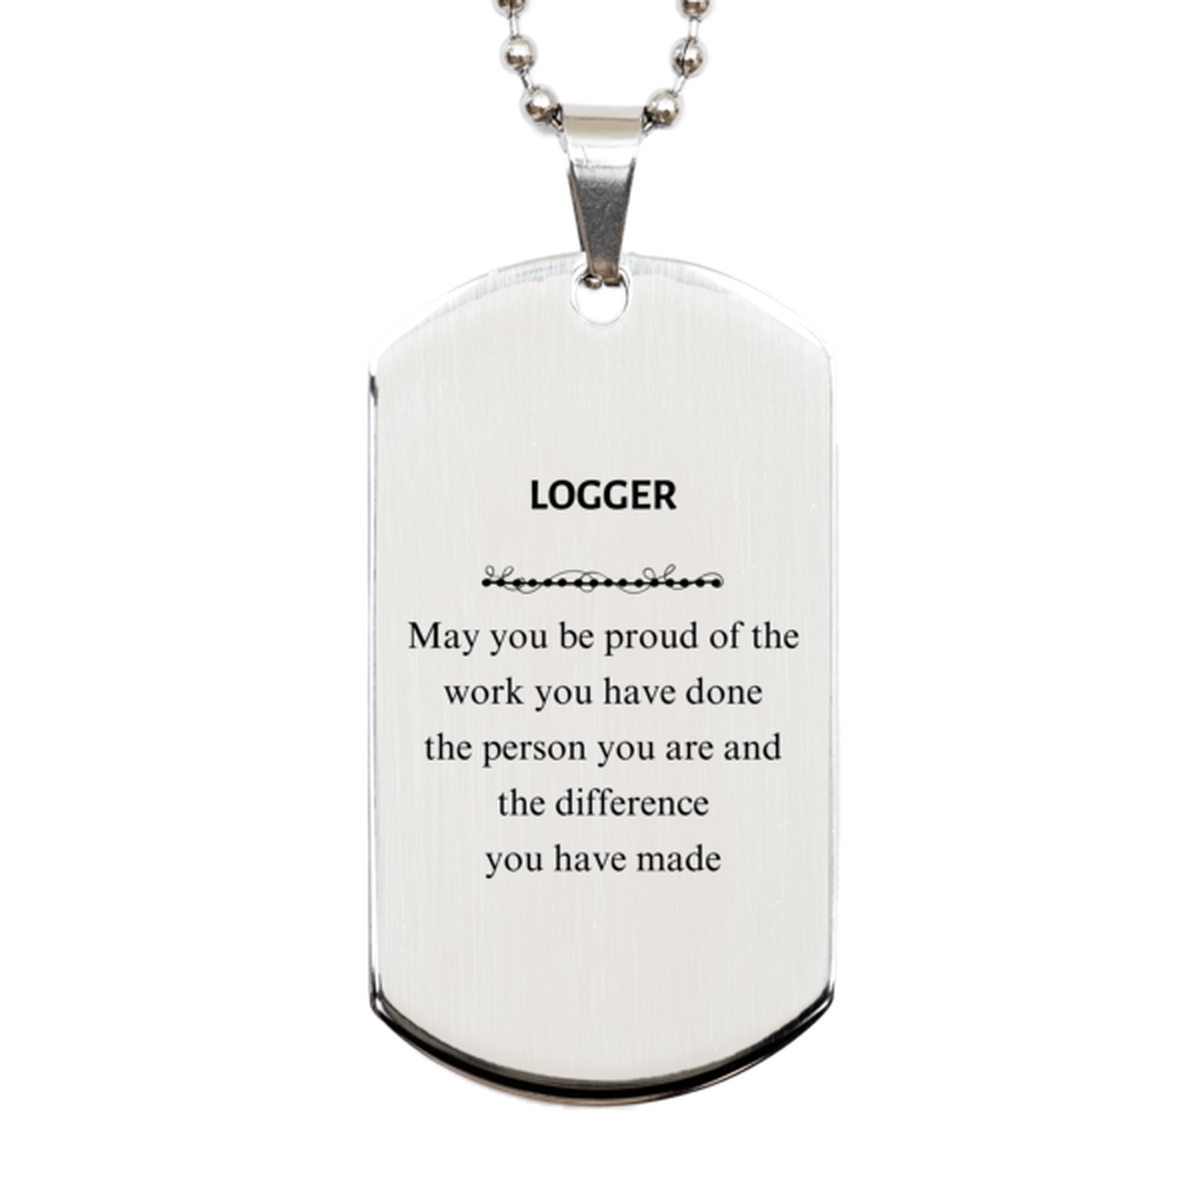 Logger May you be proud of the work you have done, Retirement Logger Silver Dog Tag for Colleague Appreciation Gifts Amazing for Logger